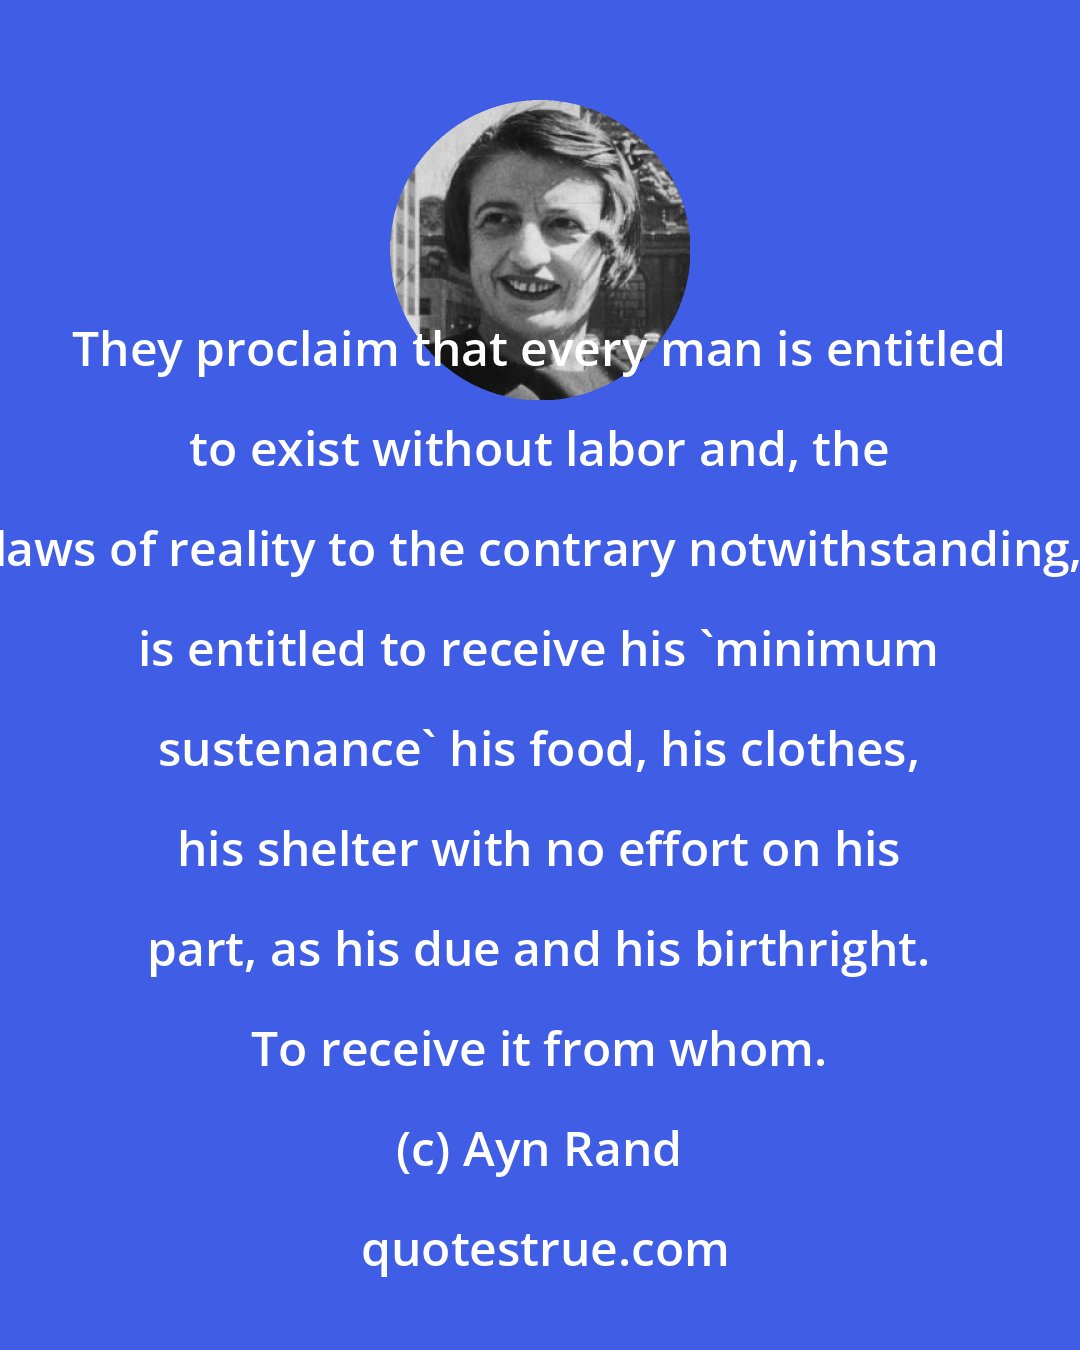 Ayn Rand: They proclaim that every man is entitled to exist without labor and, the laws of reality to the contrary notwithstanding, is entitled to receive his 'minimum sustenance' his food, his clothes, his shelter with no effort on his part, as his due and his birthright. To receive it from whom.